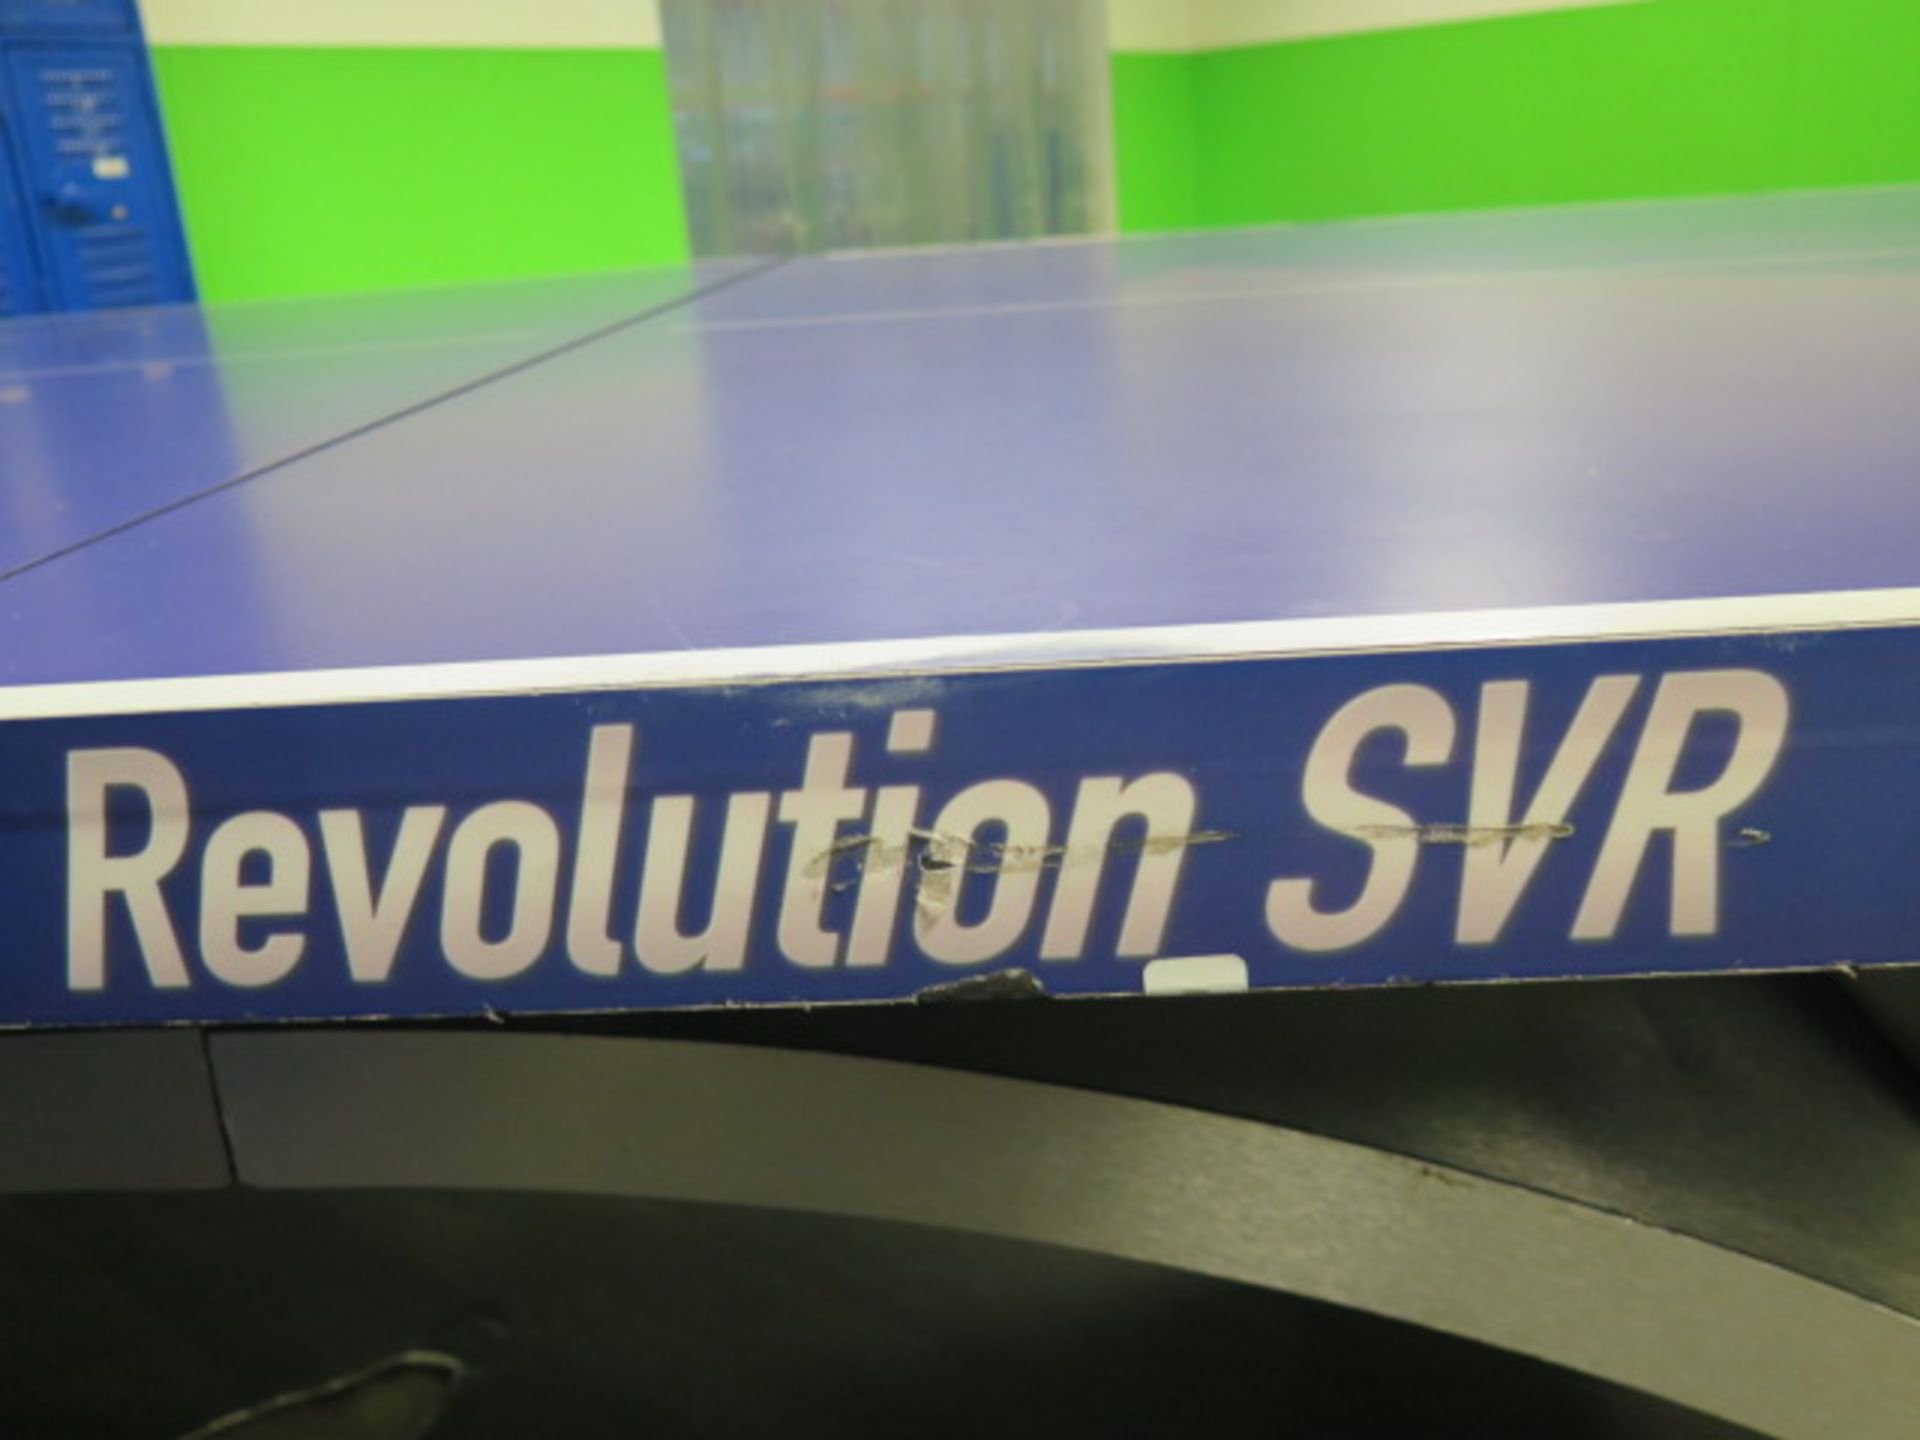 Killerspin "Revolution SVR" Professional Series Ping-Pong Table (SOLD AS-IS - NO WARRANTY) - Image 7 of 8